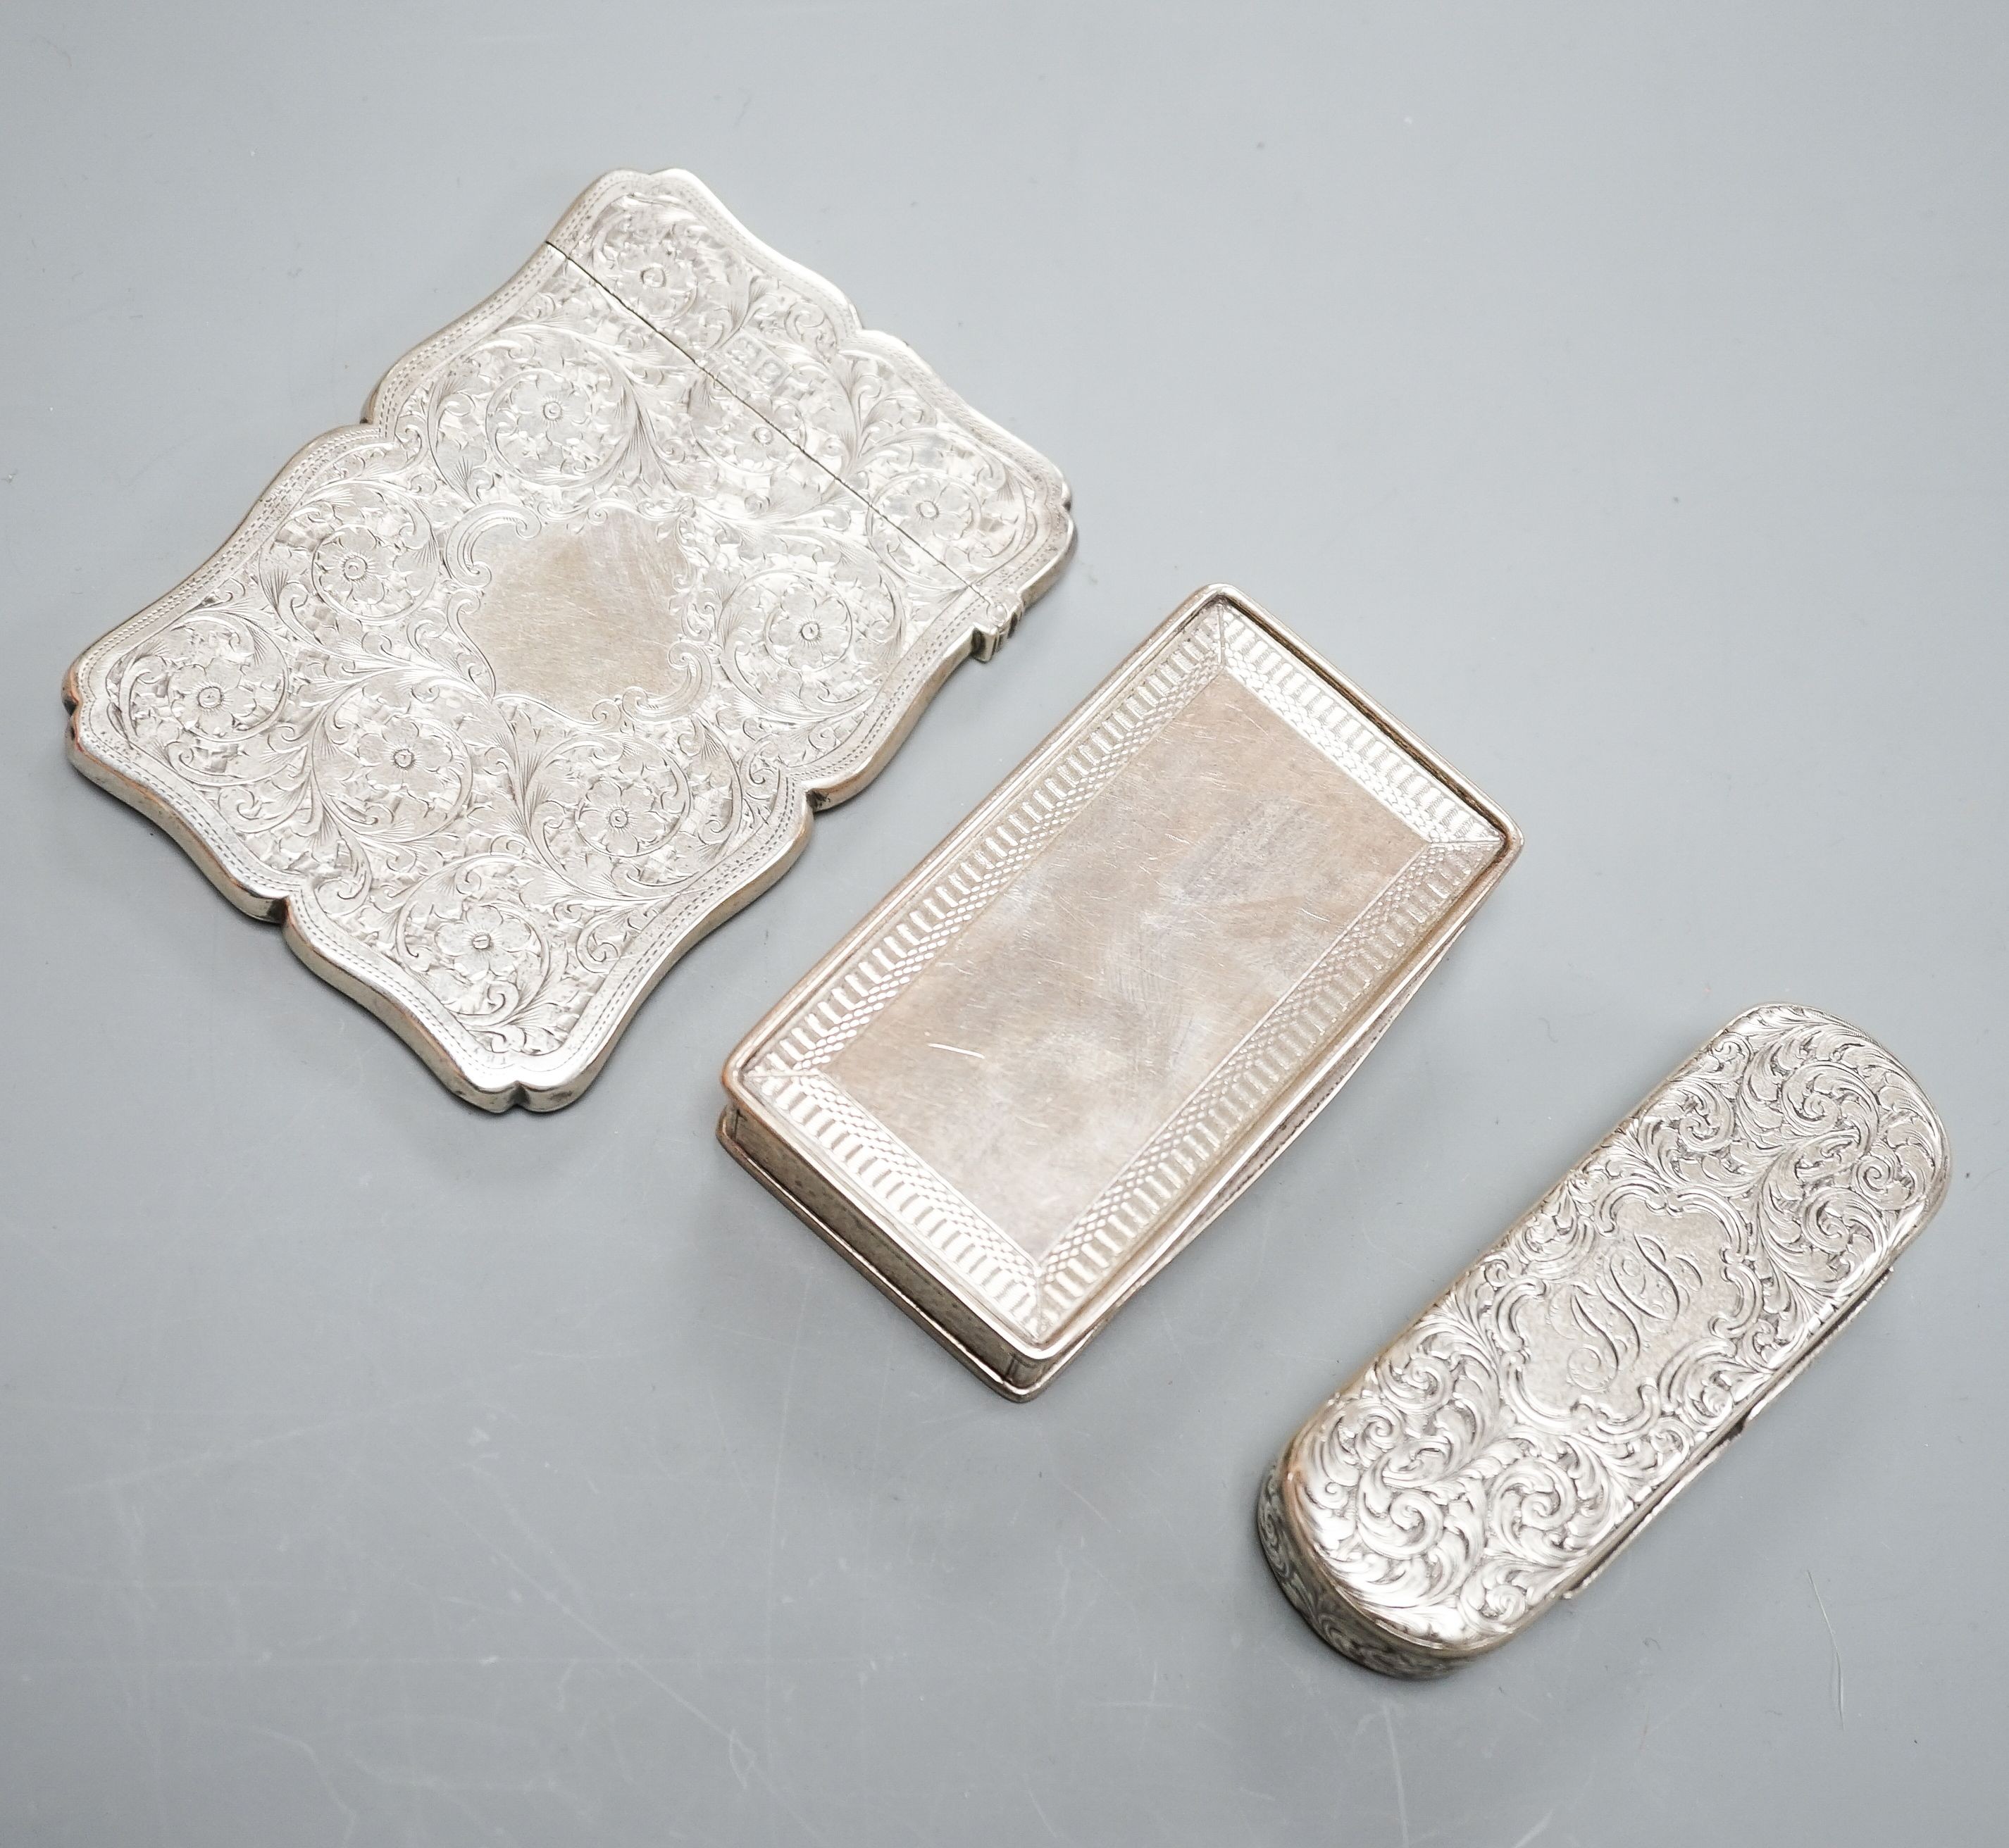 Two English silver snuff boxes, rectangular Birmingham, 1827, 81mm and Edward Smith oval, Birmingham, 1851 together with an Edwardian silver card case, Goldsmiths & Silversmiths, London, 1902.